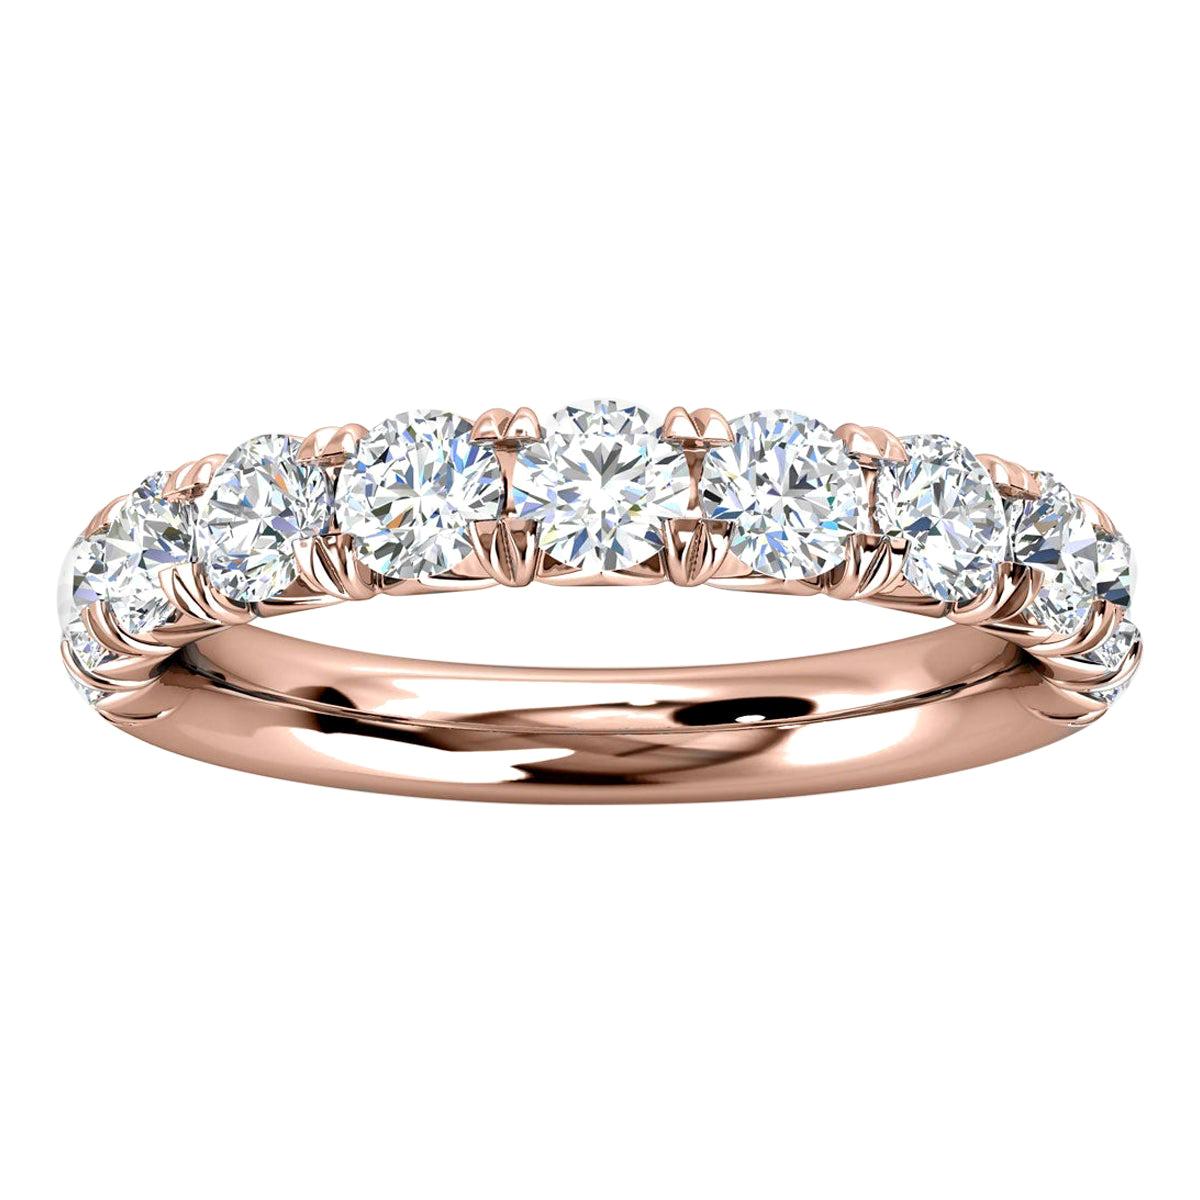 For Sale:  14k Rose Gold Voyage French Pave Diamond Ring '1 Ct. tw'